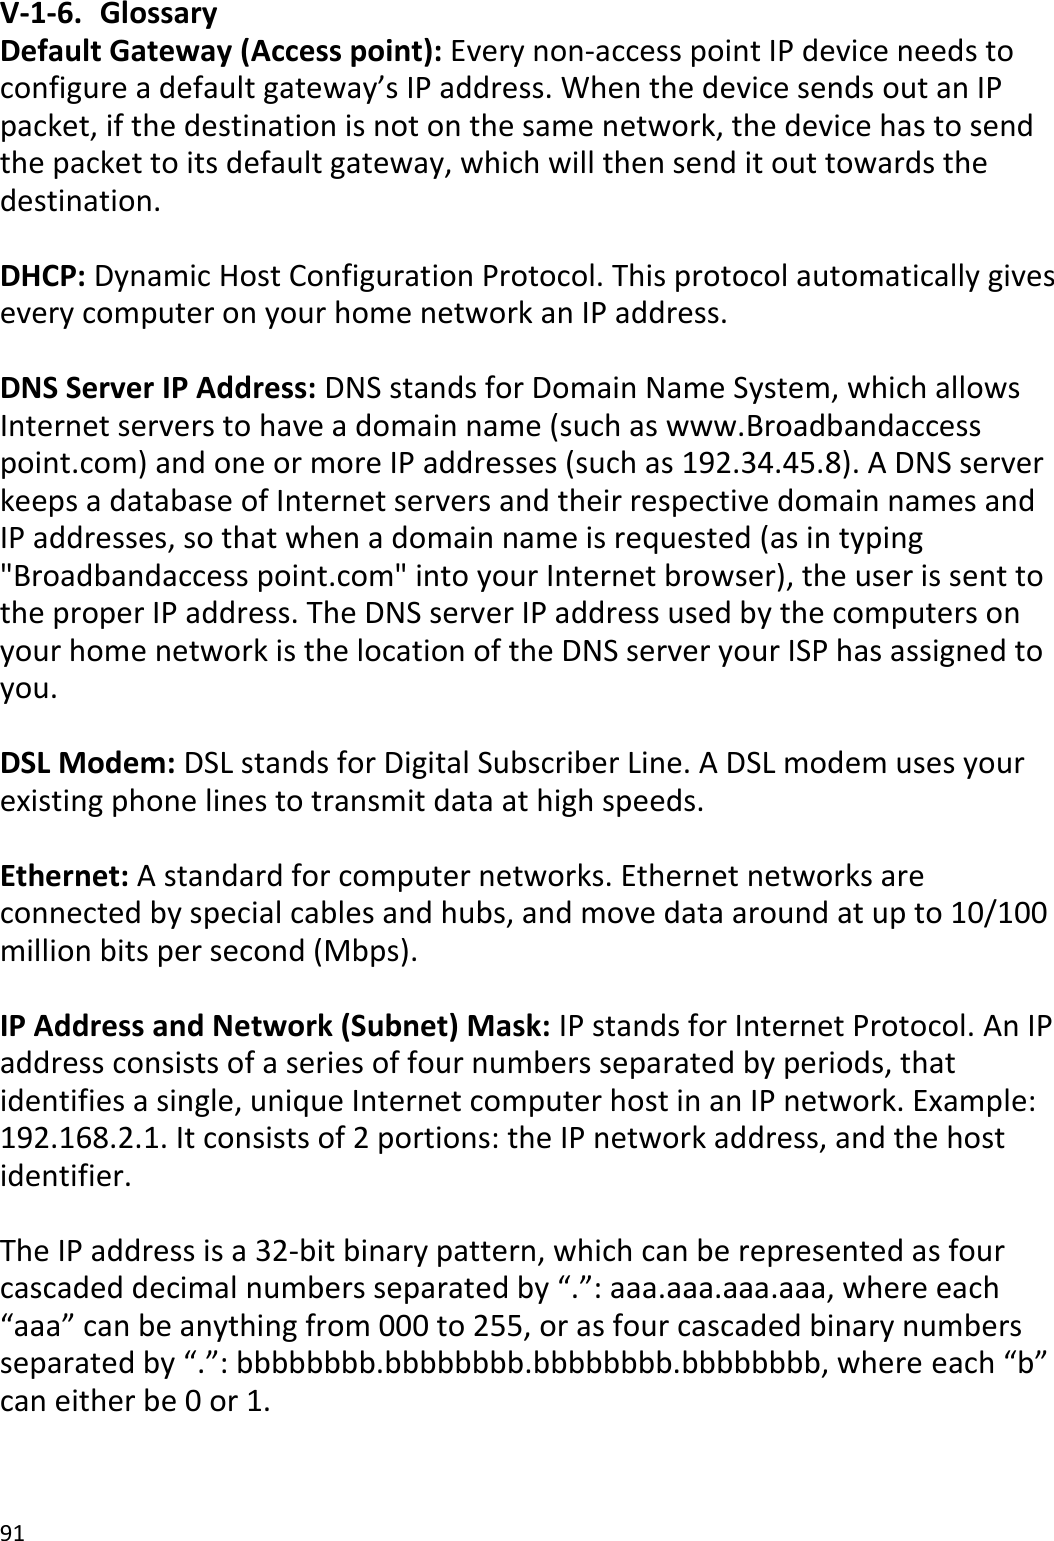 91  V-1-6.  Glossary Default Gateway (Access point): Every non-access point IP device needs to configure a default gateway’s IP address. When the device sends out an IP packet, if the destination is not on the same network, the device has to send the packet to its default gateway, which will then send it out towards the destination.  DHCP: Dynamic Host Configuration Protocol. This protocol automatically gives every computer on your home network an IP address.  DNS Server IP Address: DNS stands for Domain Name System, which allows Internet servers to have a domain name (such as www.Broadbandaccess point.com) and one or more IP addresses (such as 192.34.45.8). A DNS server keeps a database of Internet servers and their respective domain names and IP addresses, so that when a domain name is requested (as in typing &quot;Broadbandaccess point.com&quot; into your Internet browser), the user is sent to the proper IP address. The DNS server IP address used by the computers on your home network is the location of the DNS server your ISP has assigned to you.   DSL Modem: DSL stands for Digital Subscriber Line. A DSL modem uses your existing phone lines to transmit data at high speeds.   Ethernet: A standard for computer networks. Ethernet networks are connected by special cables and hubs, and move data around at up to 10/100 million bits per second (Mbps).  IP Address and Network (Subnet) Mask: IP stands for Internet Protocol. An IP address consists of a series of four numbers separated by periods, that identifies a single, unique Internet computer host in an IP network. Example: 192.168.2.1. It consists of 2 portions: the IP network address, and the host identifier.  The IP address is a 32-bit binary pattern, which can be represented as four cascaded decimal numbers separated by “.”: aaa.aaa.aaa.aaa, where each “aaa” can be anything from 000 to 255, or as four cascaded binary numbers separated by “.”: bbbbbbbb.bbbbbbbb.bbbbbbbb.bbbbbbbb, where each “b” can either be 0 or 1.  